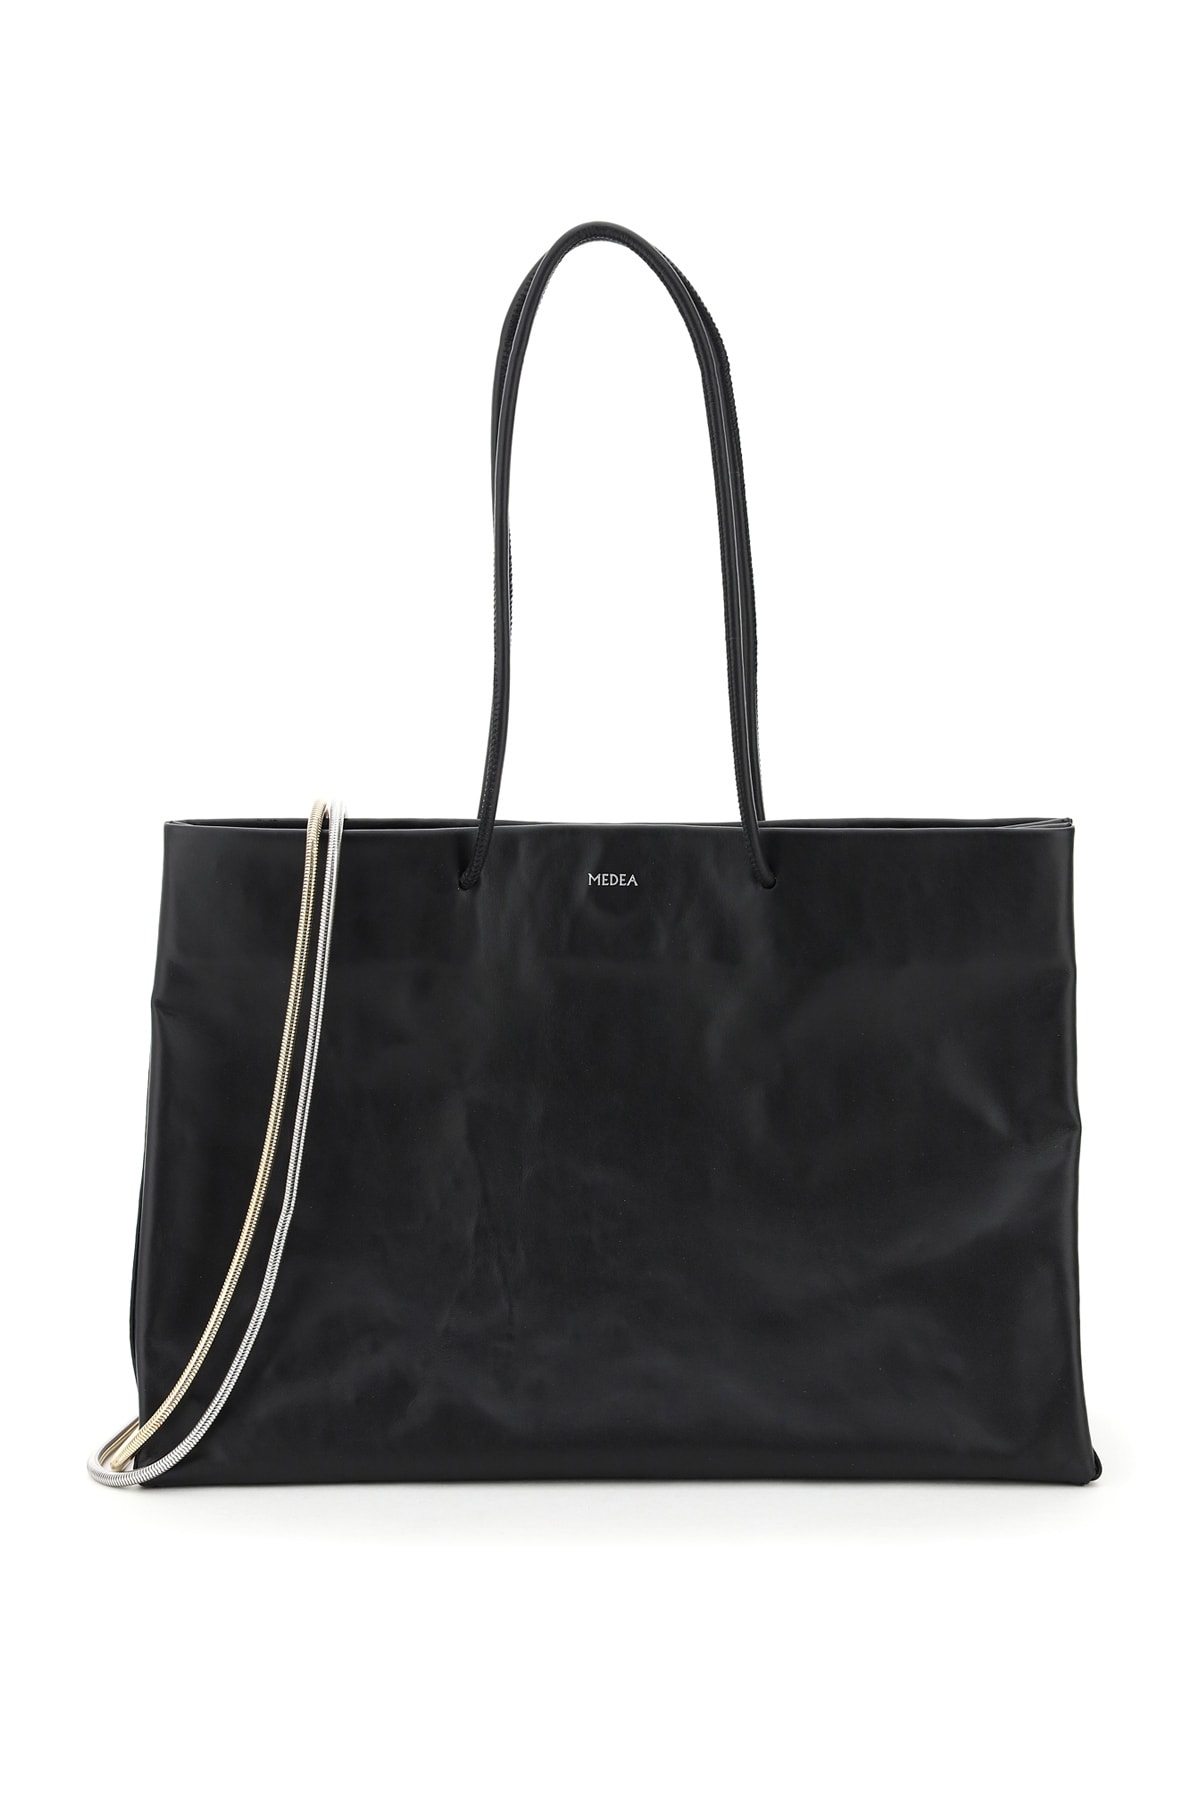 Medea Busted Dieci Leather Tote